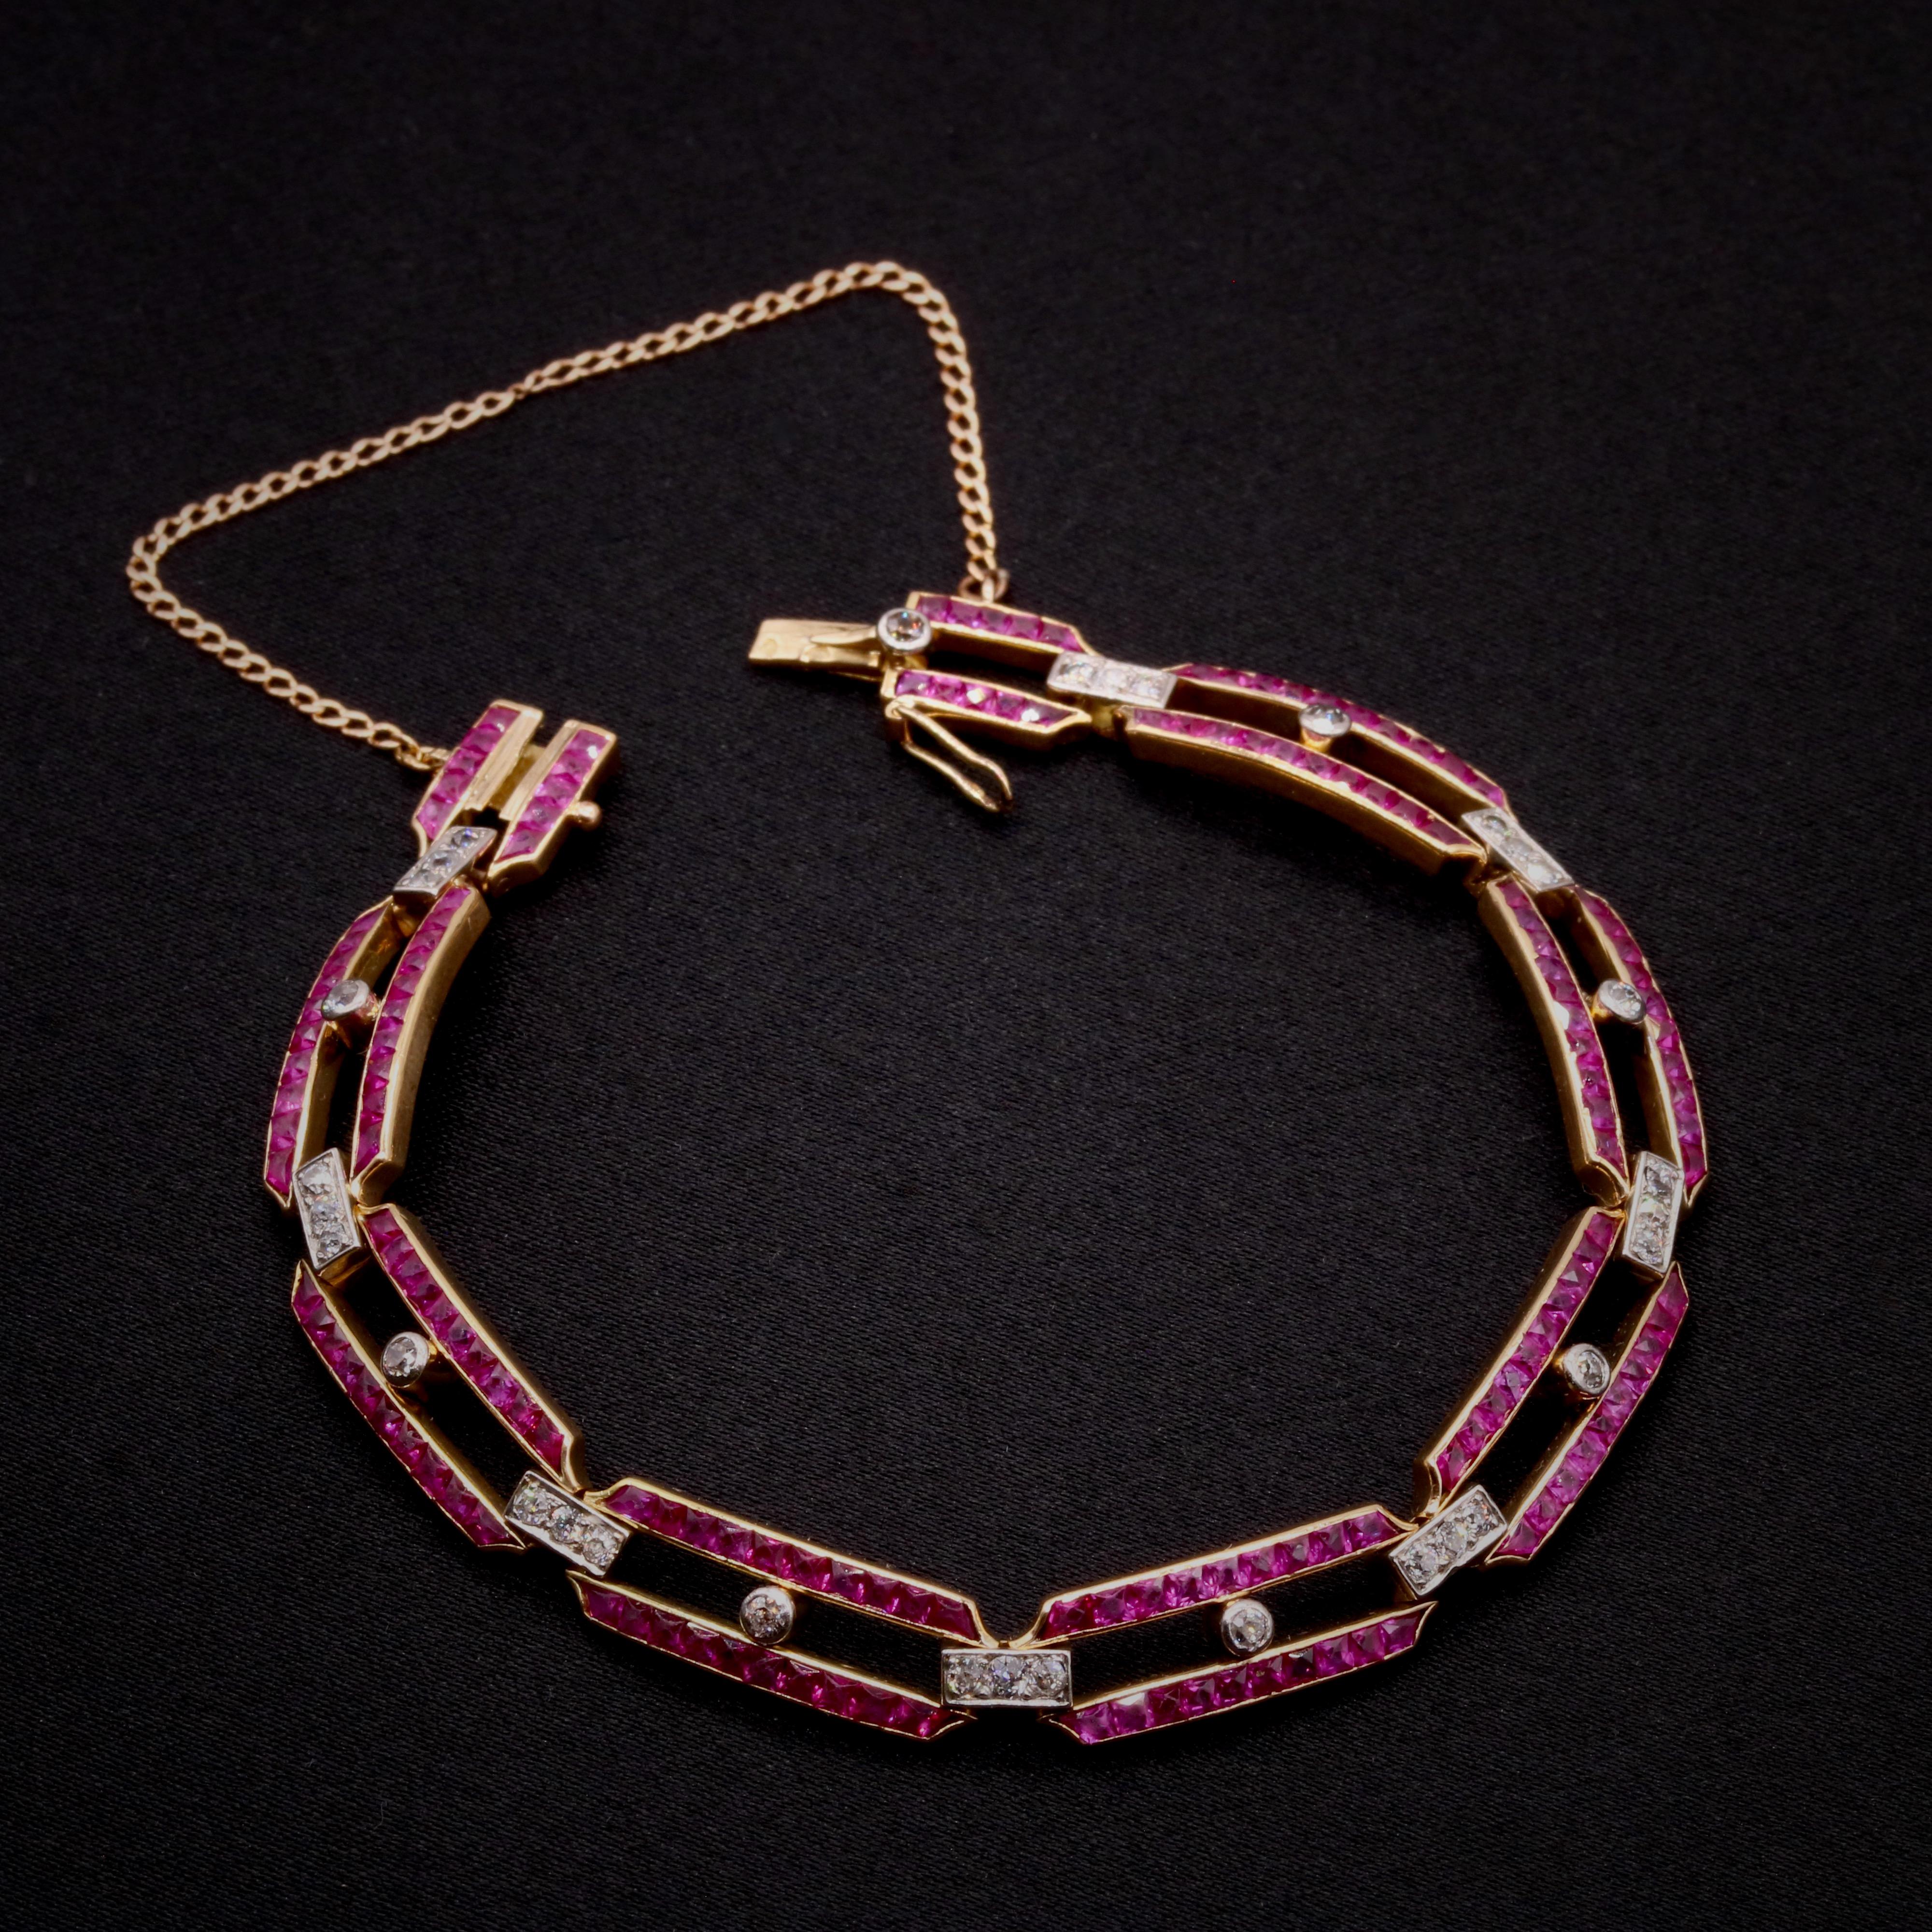 Art Deco 1940s 18K Gold & Platinum 5.38tgw Ruby & Diamond Link Bracelet In Good Condition For Sale In Staines-Upon-Thames, GB